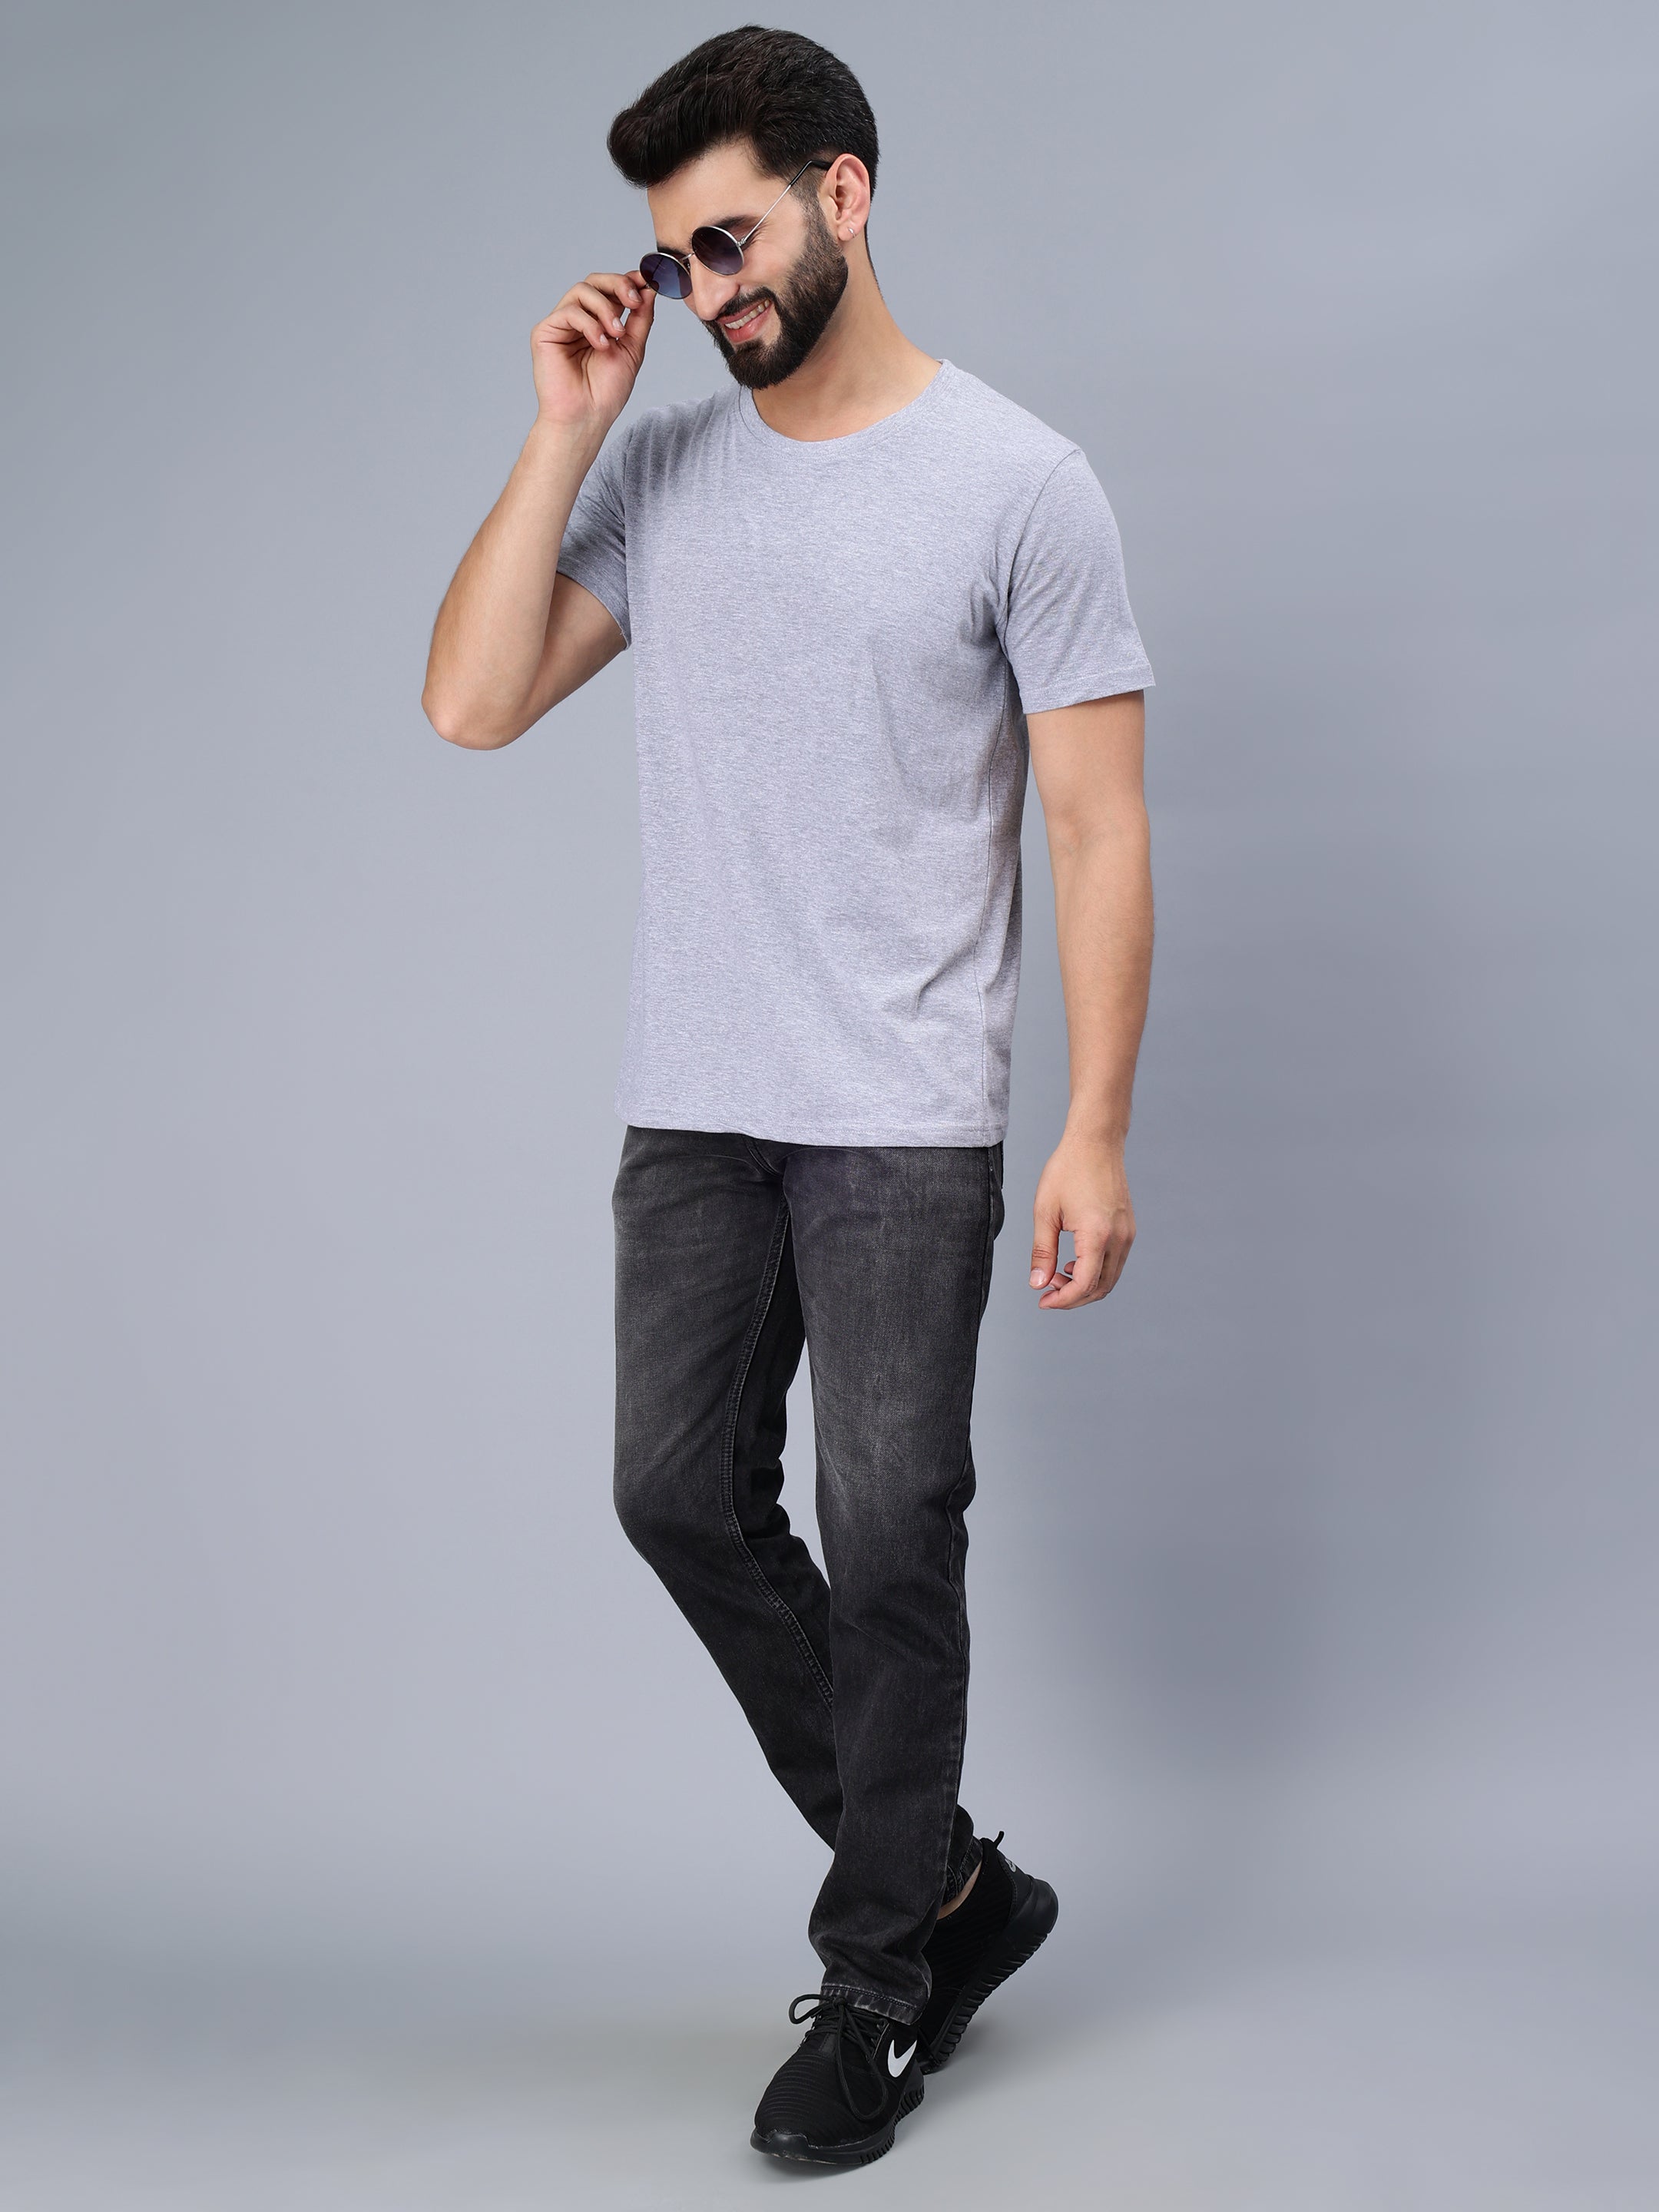 STONE WASH REGULAR FIT JEANS